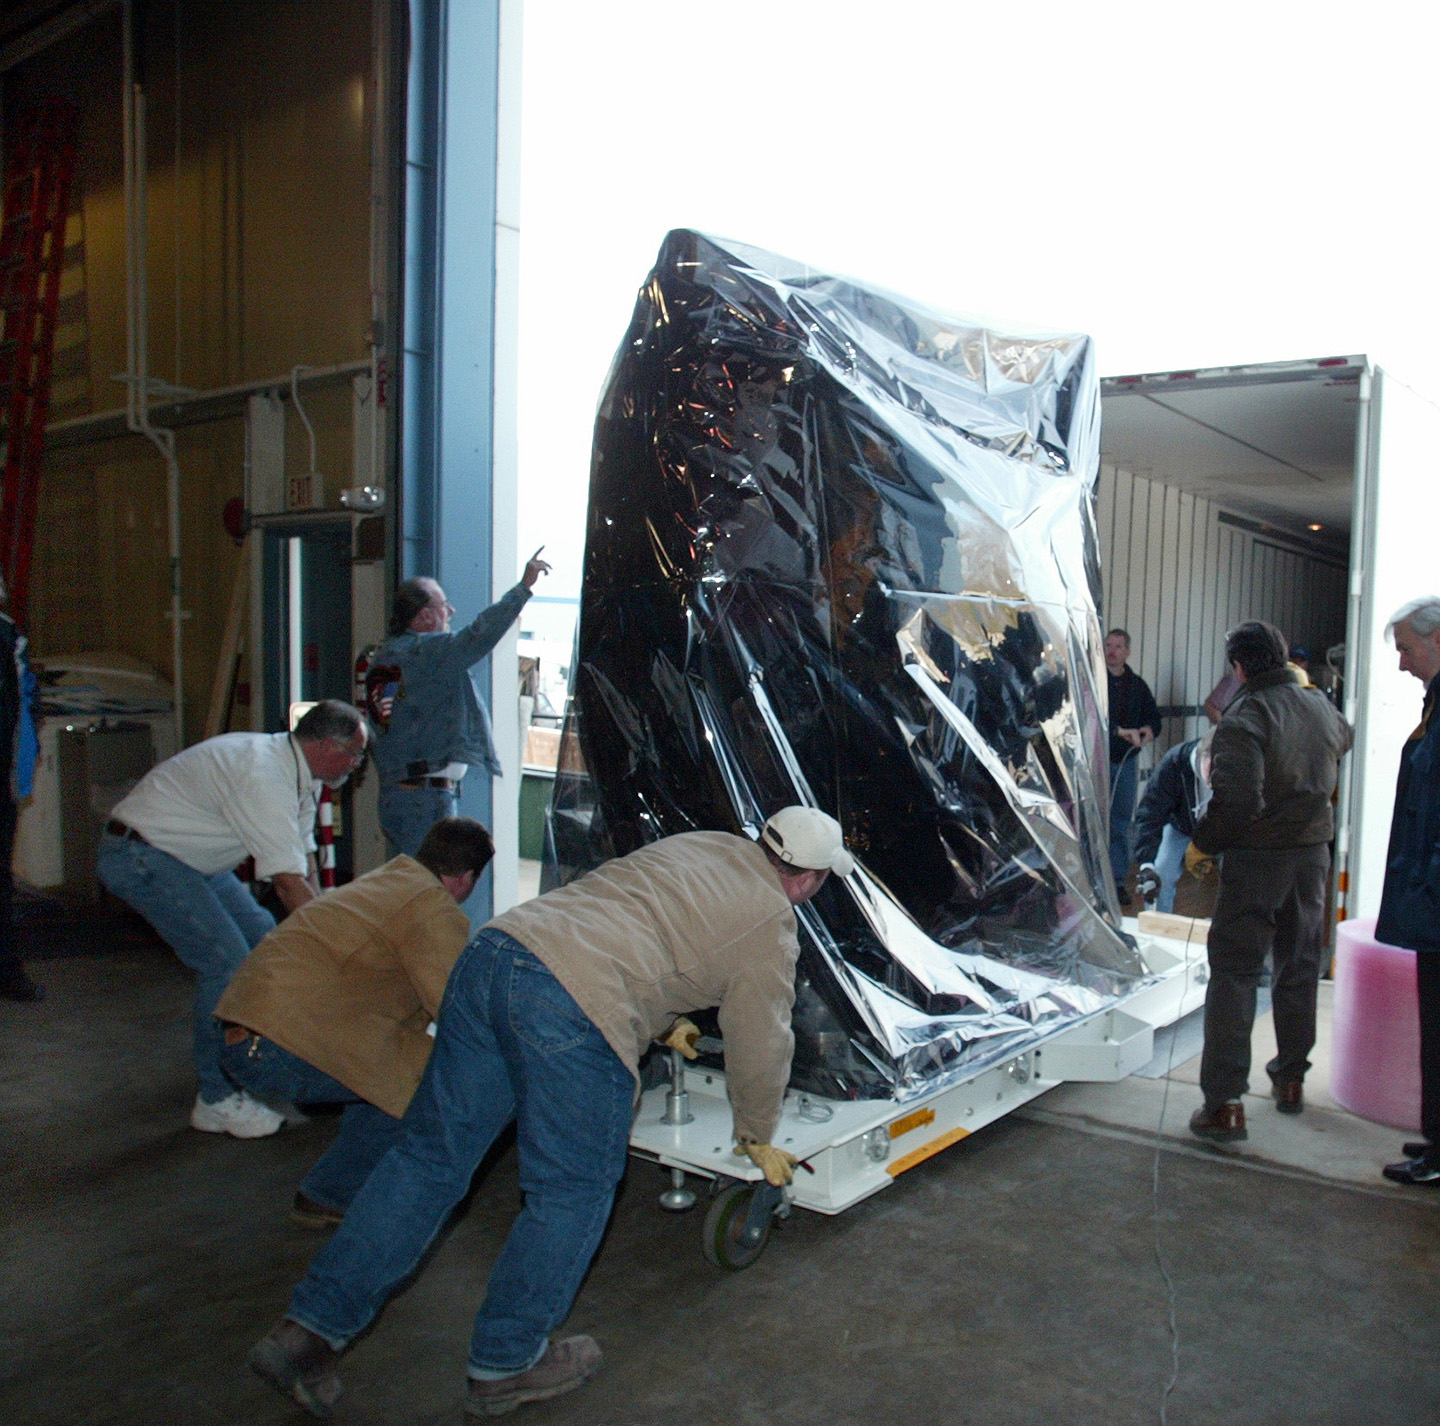 Wrapped in protective film, the MESSENGER spacecraft is loaded into a moving van